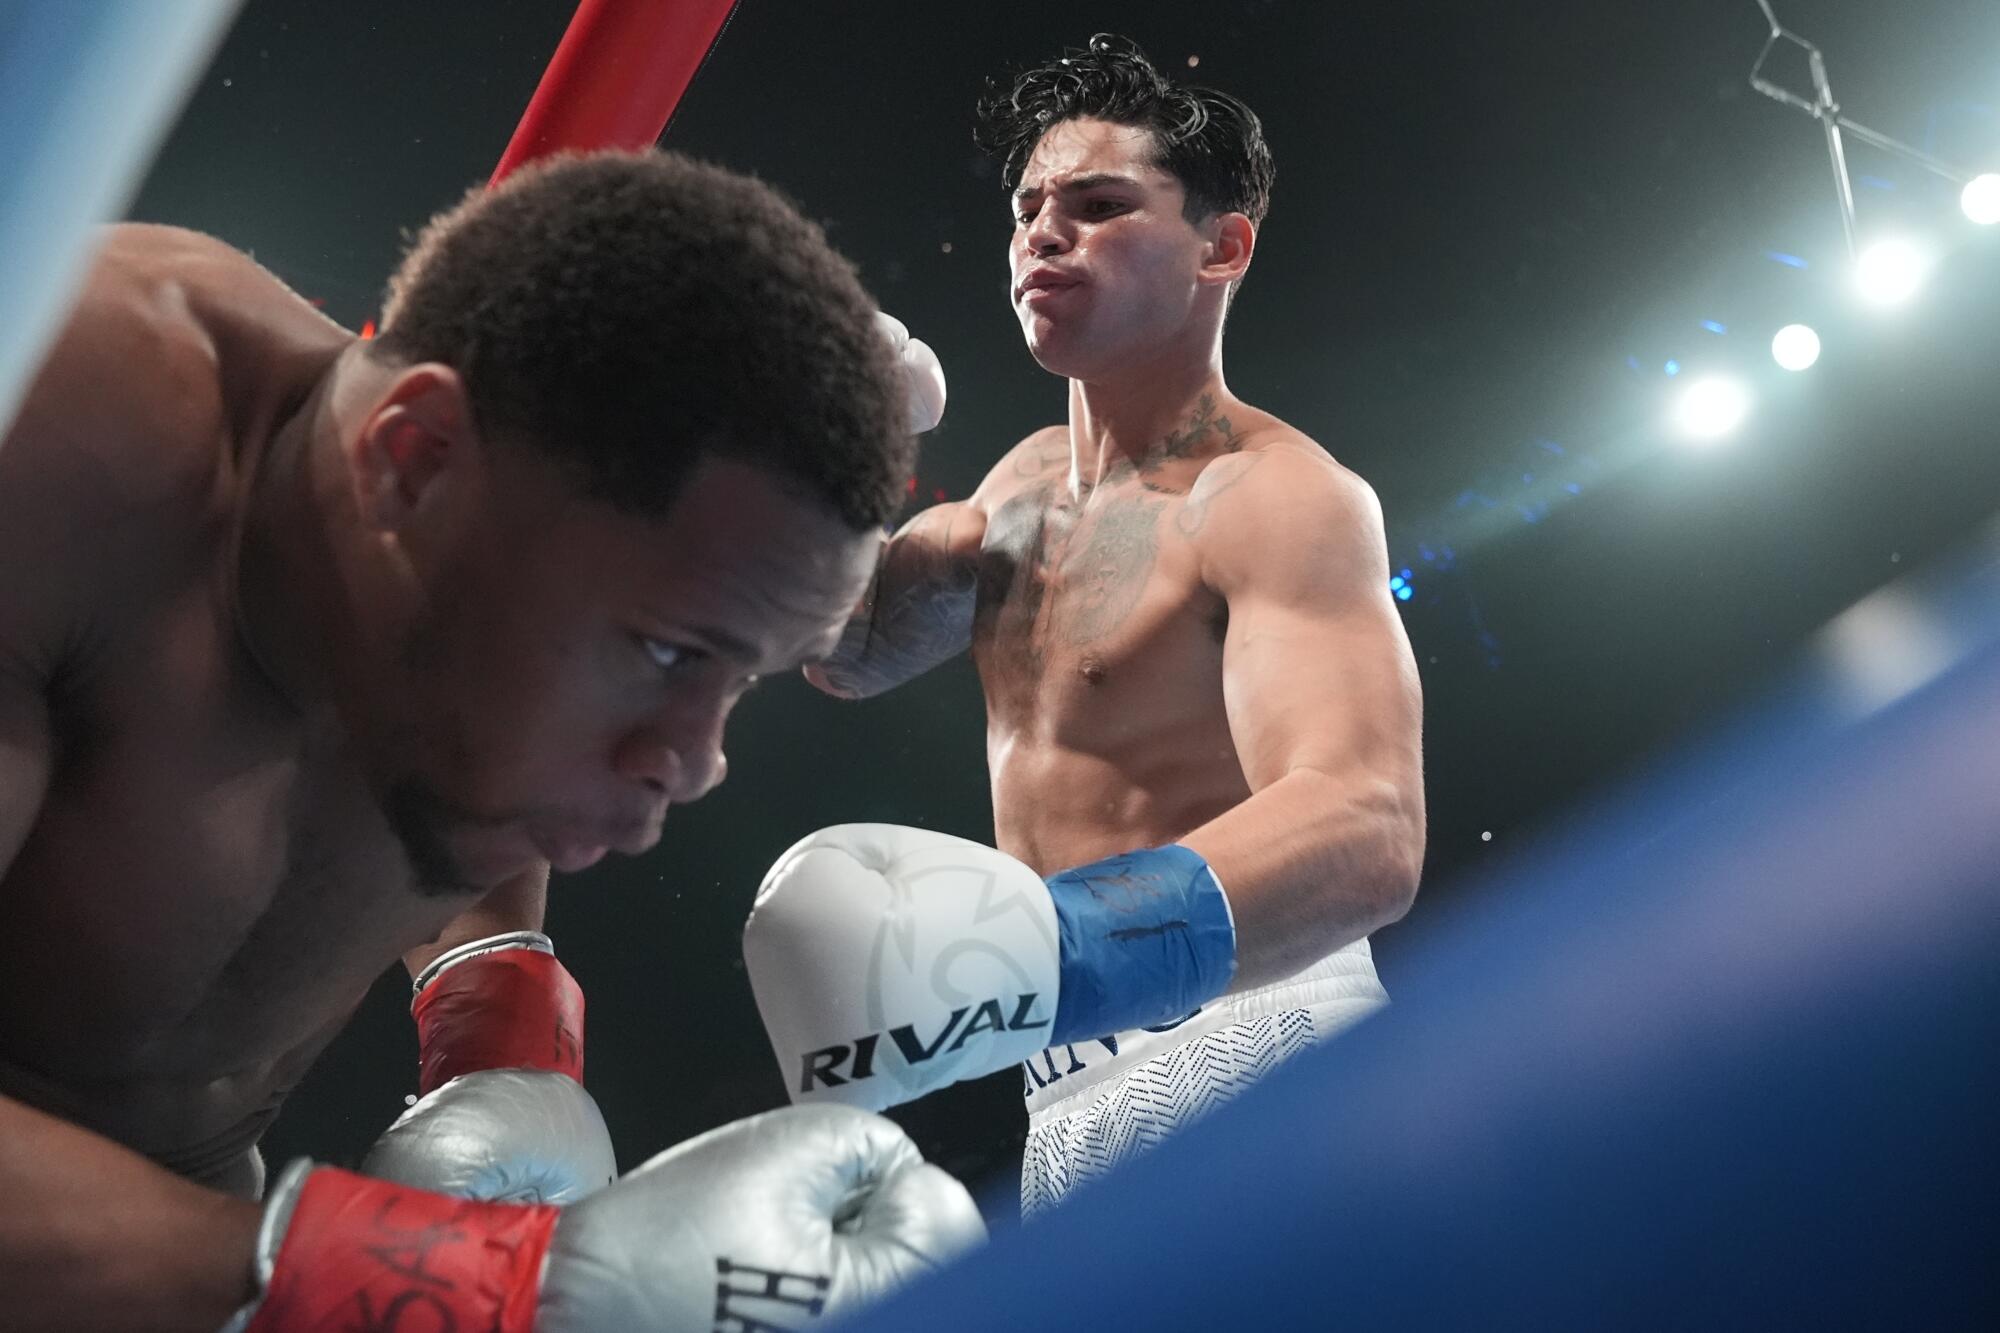 Ryan Garcia Retaliates and Shocks Everyone by Revealing What He Would Do in the Event of a Lifelong Ban